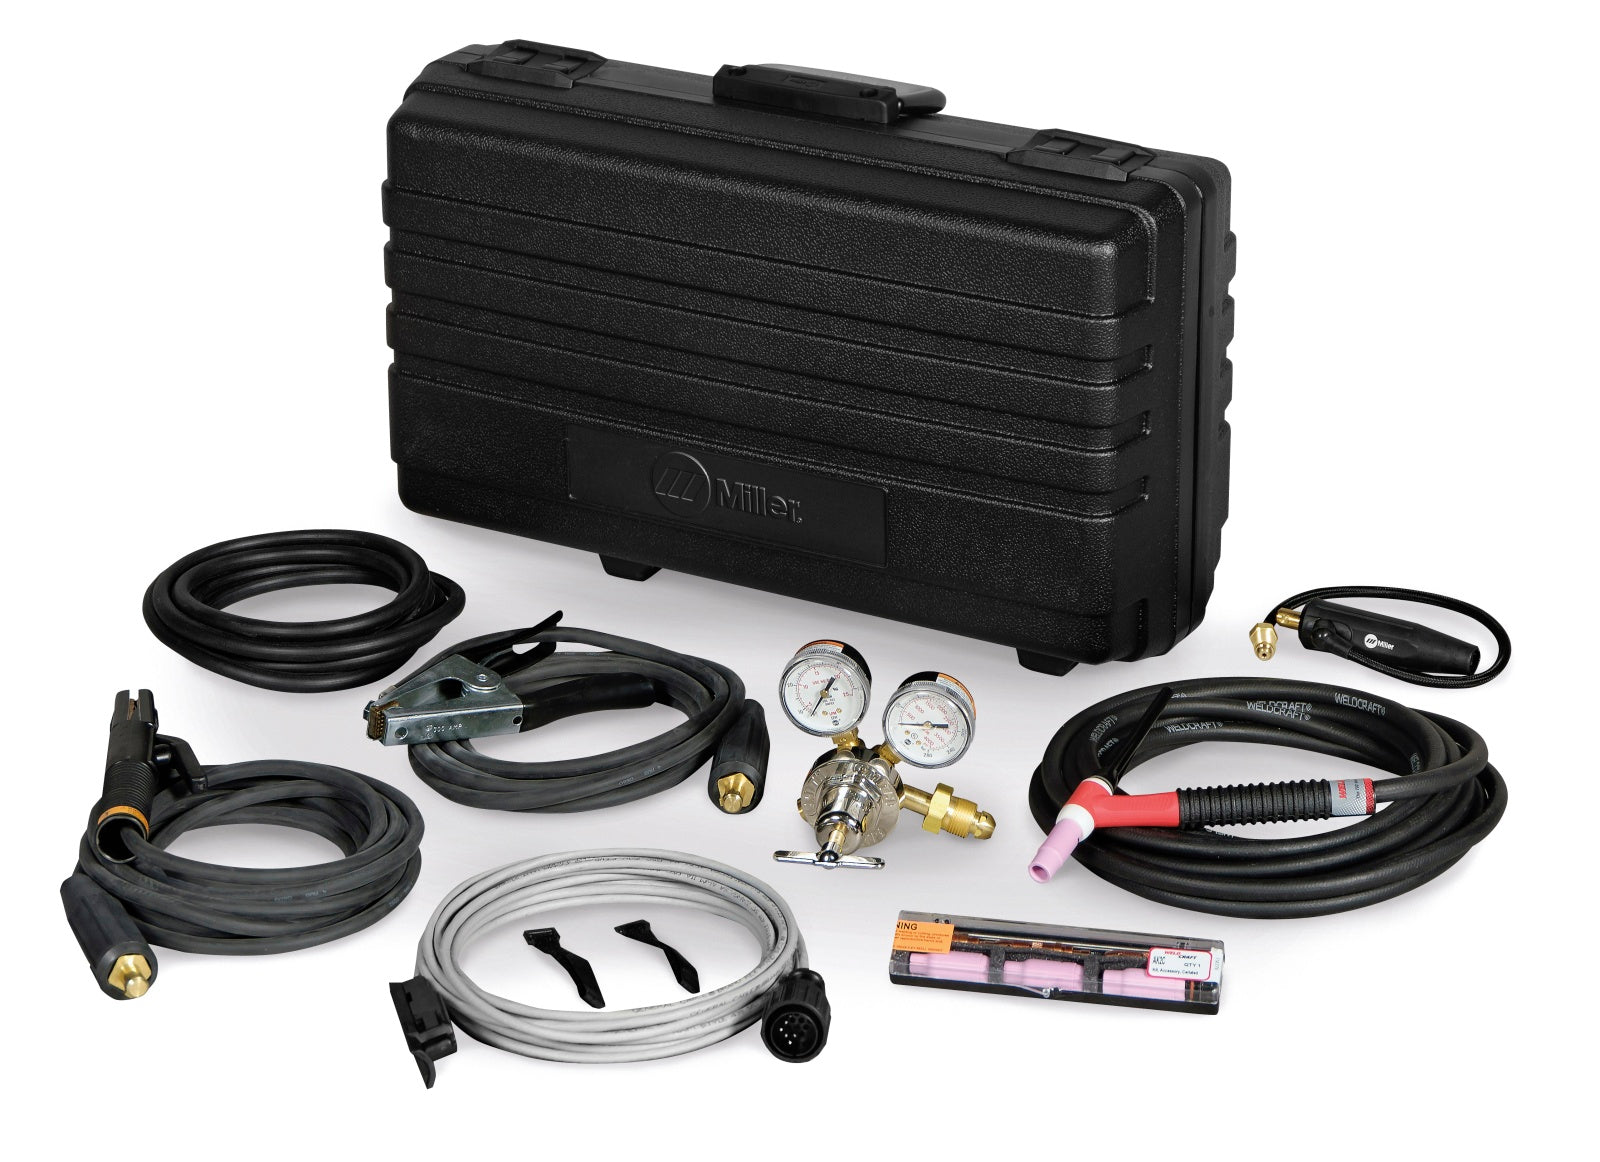 Miller Dynasty 200 DX TIG Welder and Air-Cooled Contractor Kit with Fingertip Control (951175)